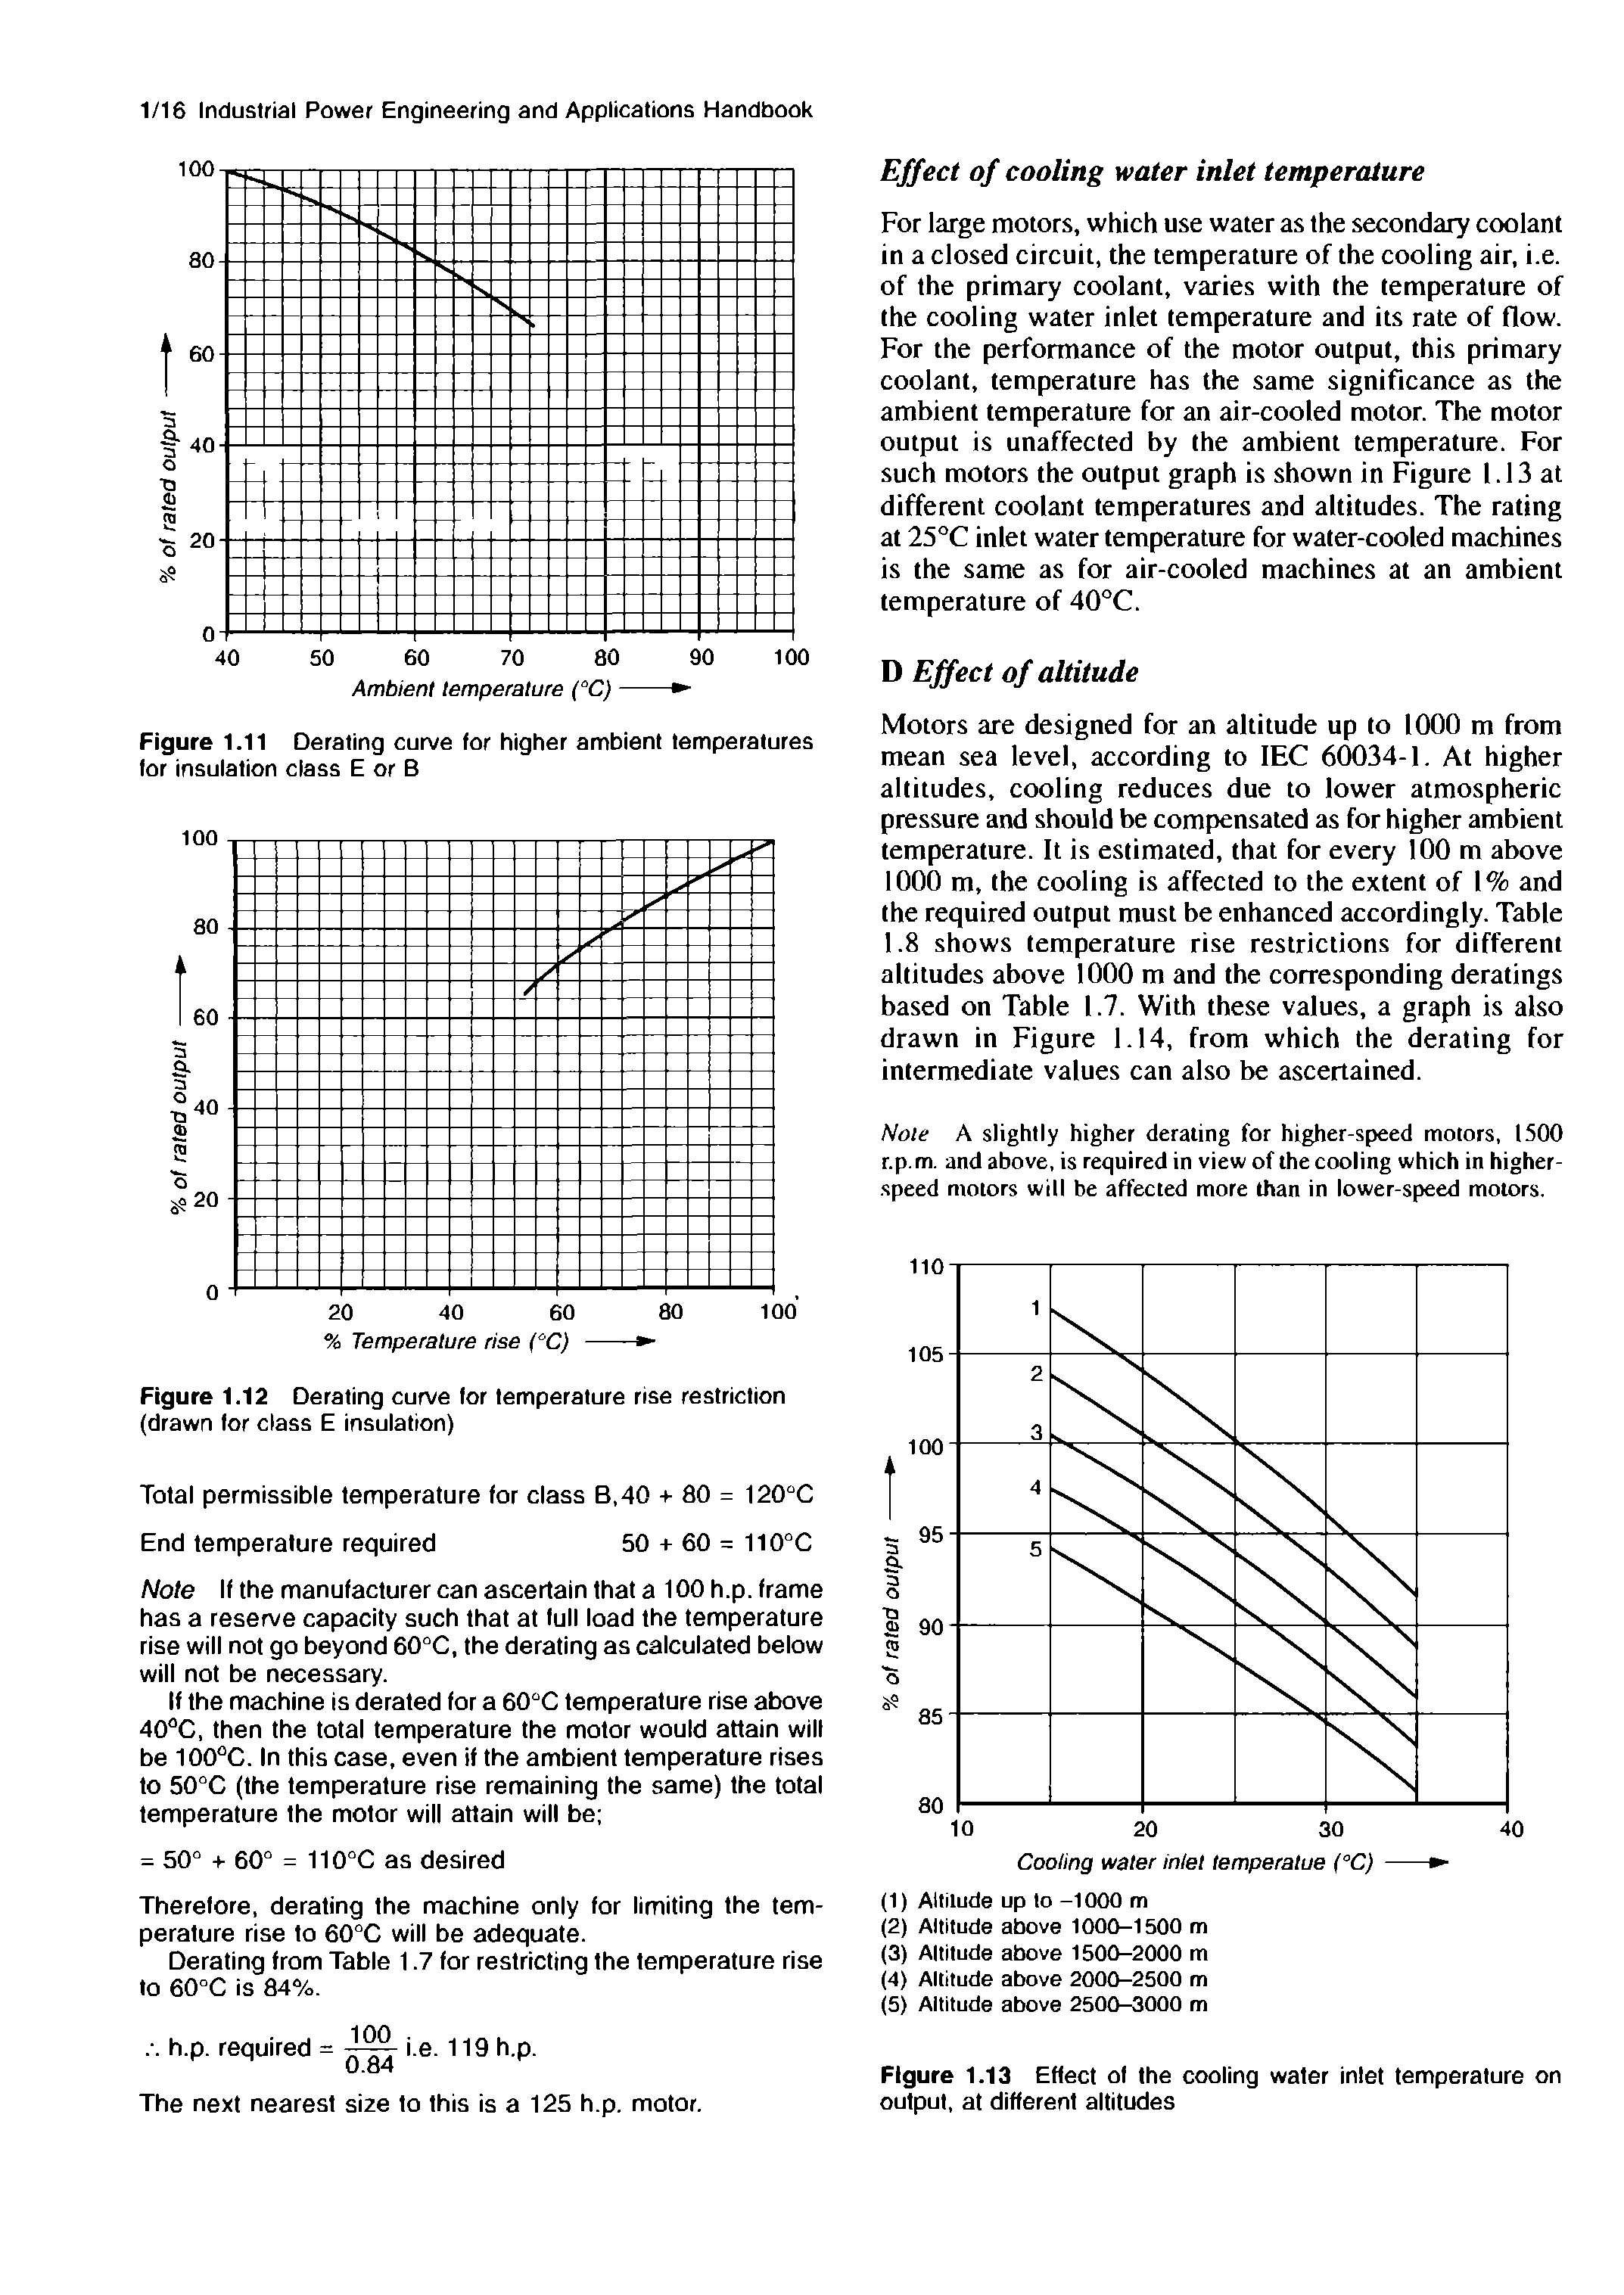 Figure 1.12 Derating curve for temperature rise restriction (drawn for class E insulation)...